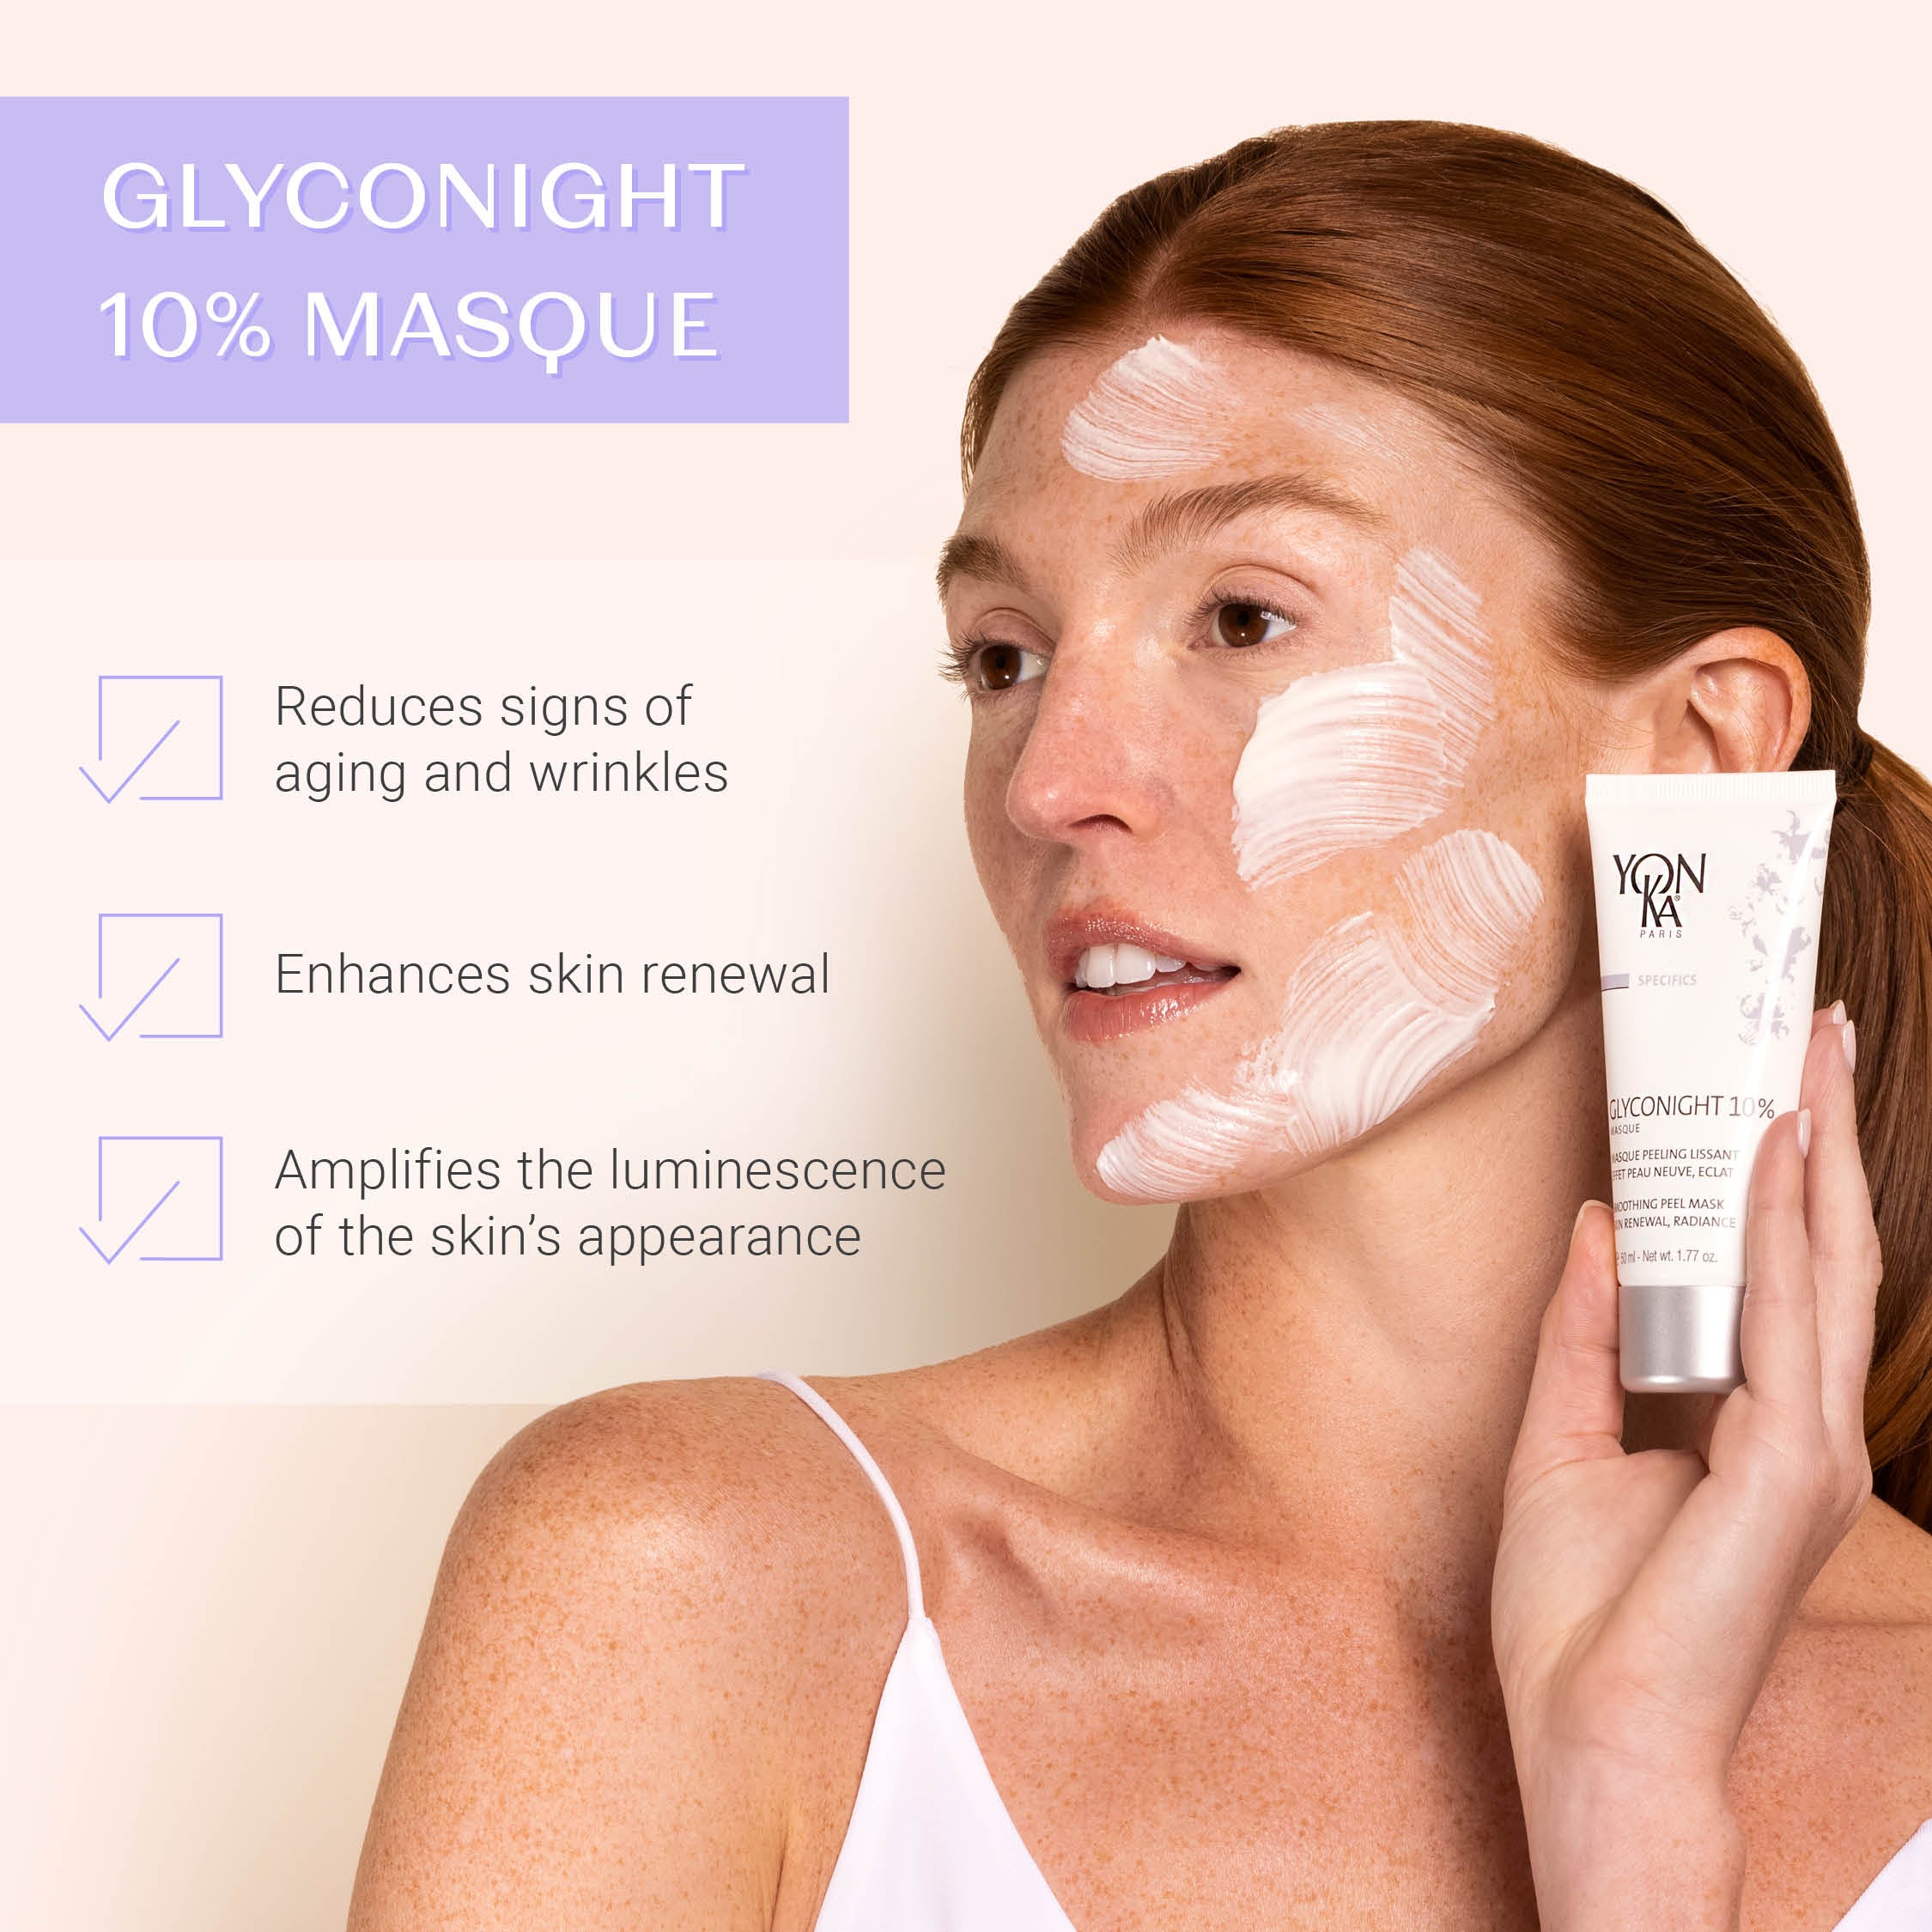 Introductory Glyconight 10% Masque